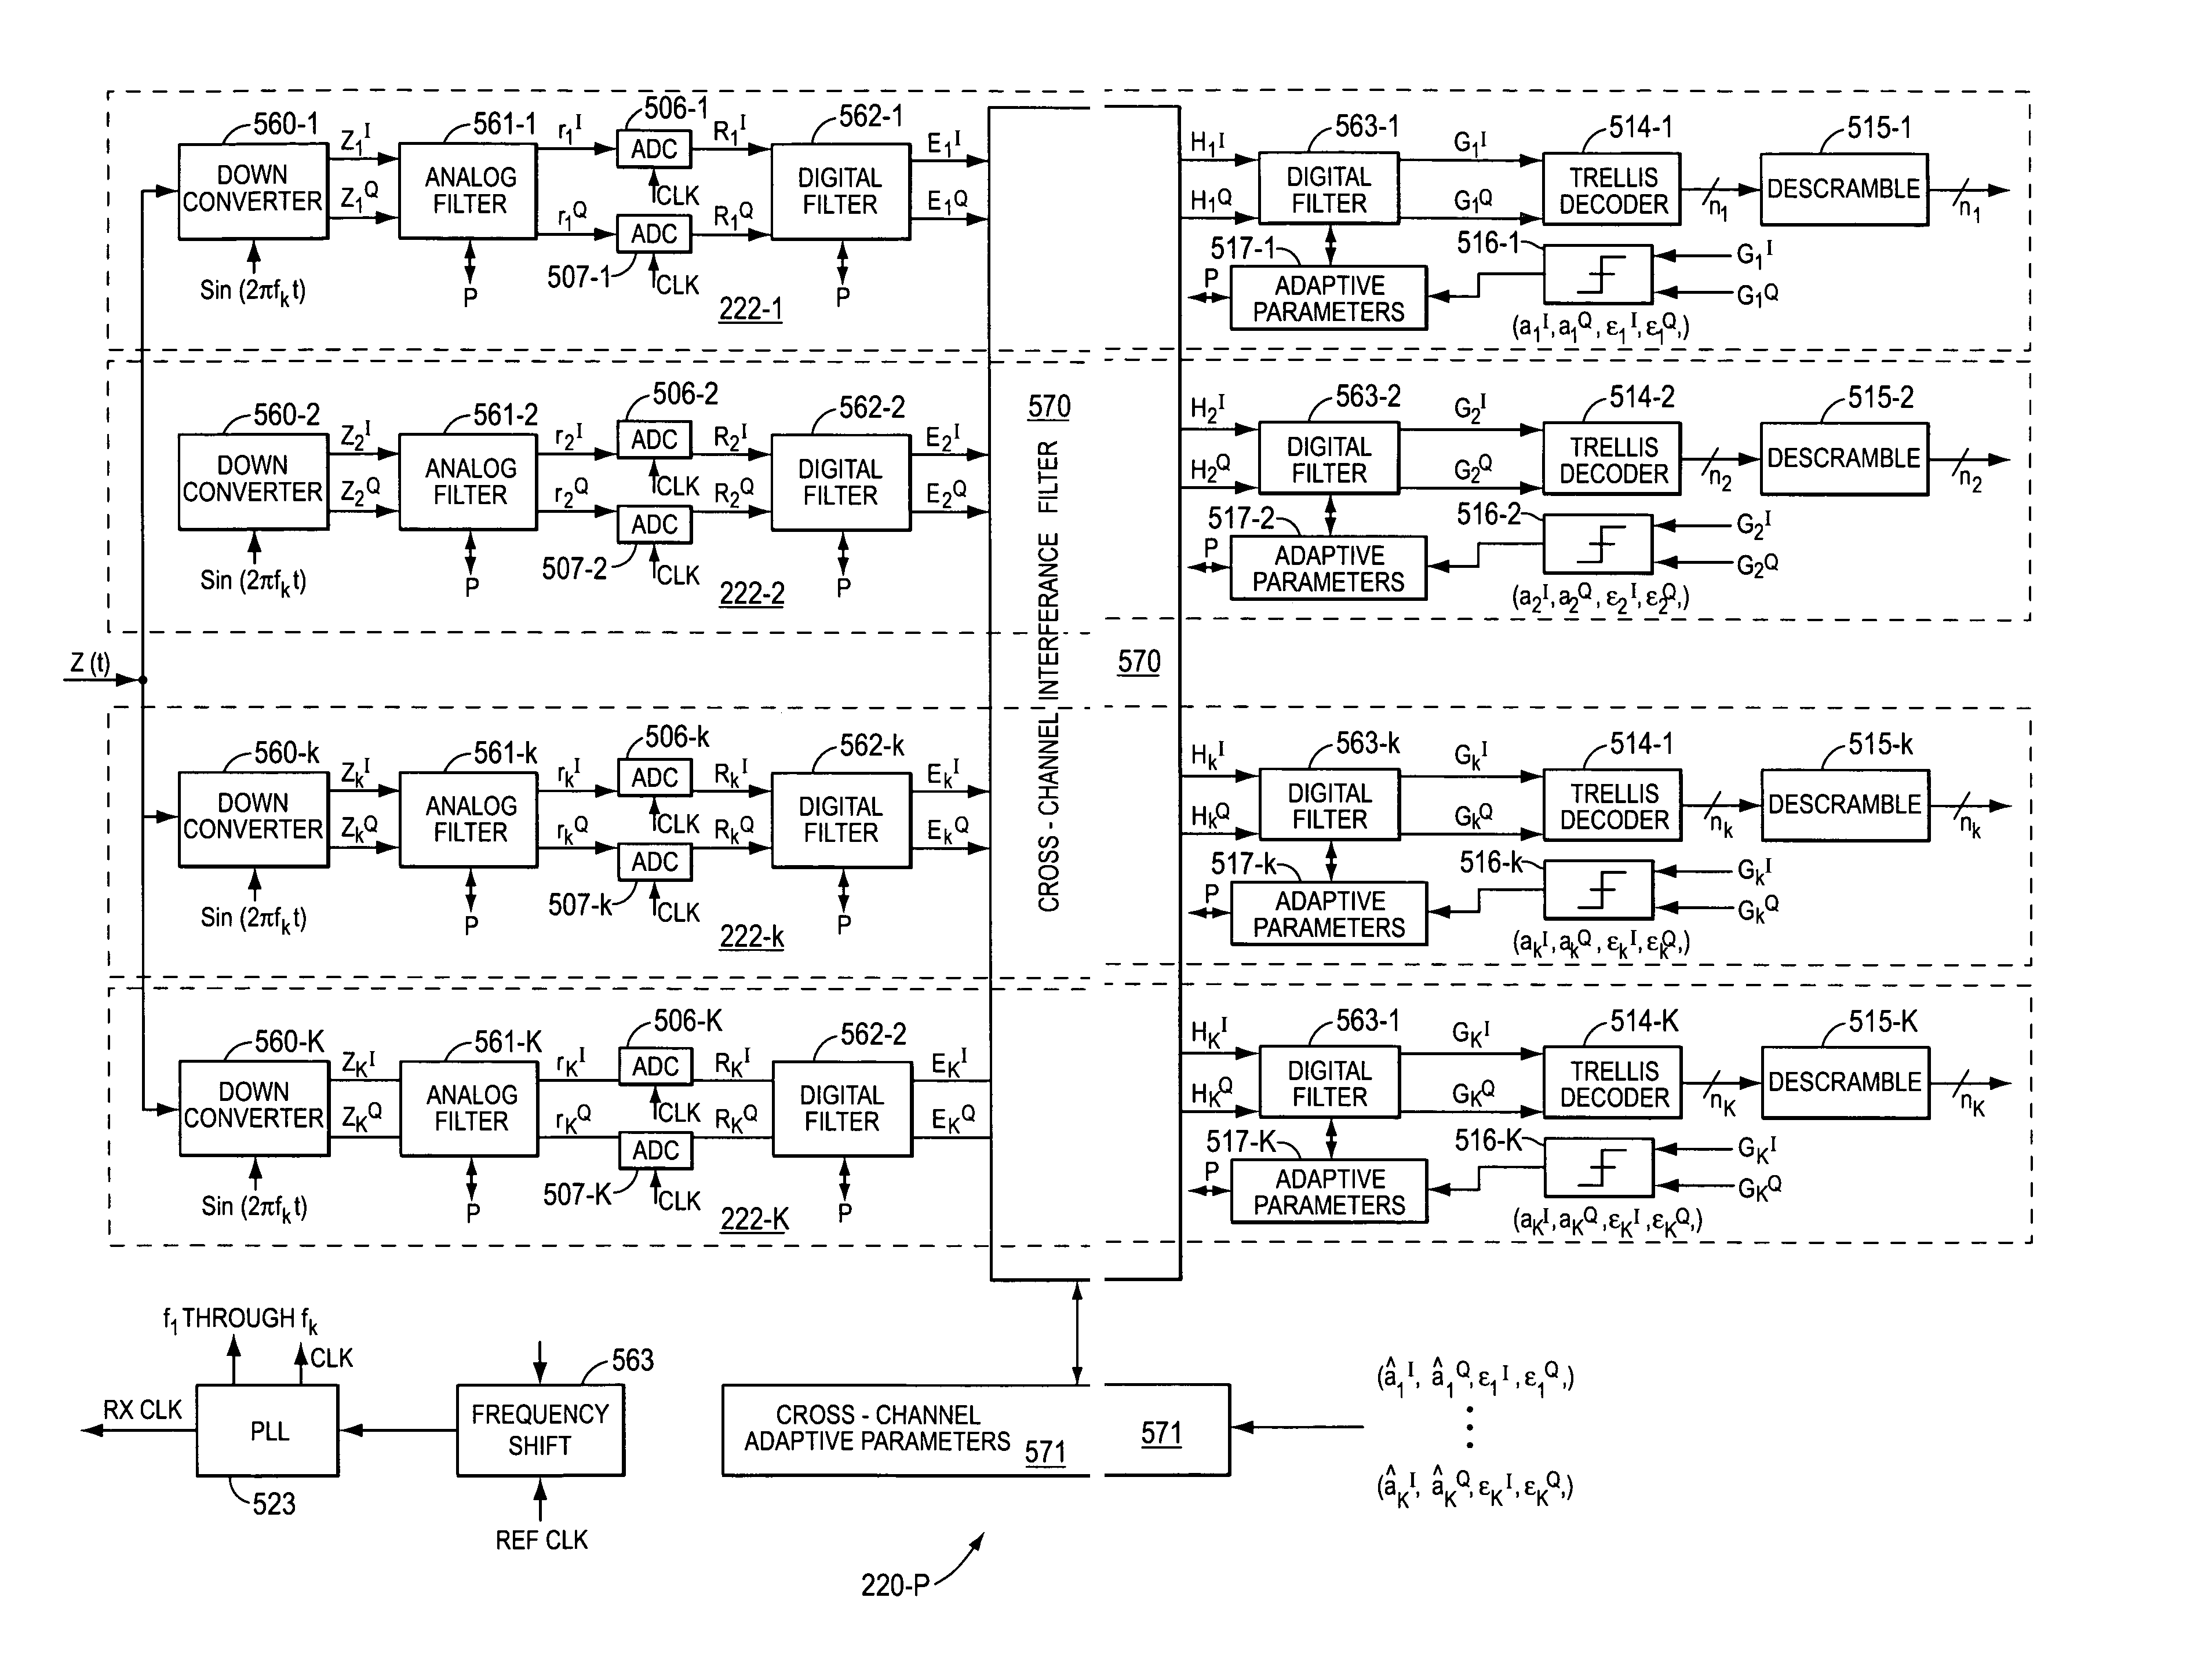 High-speed multi-channel communications transceiver with inter-channel interference filter